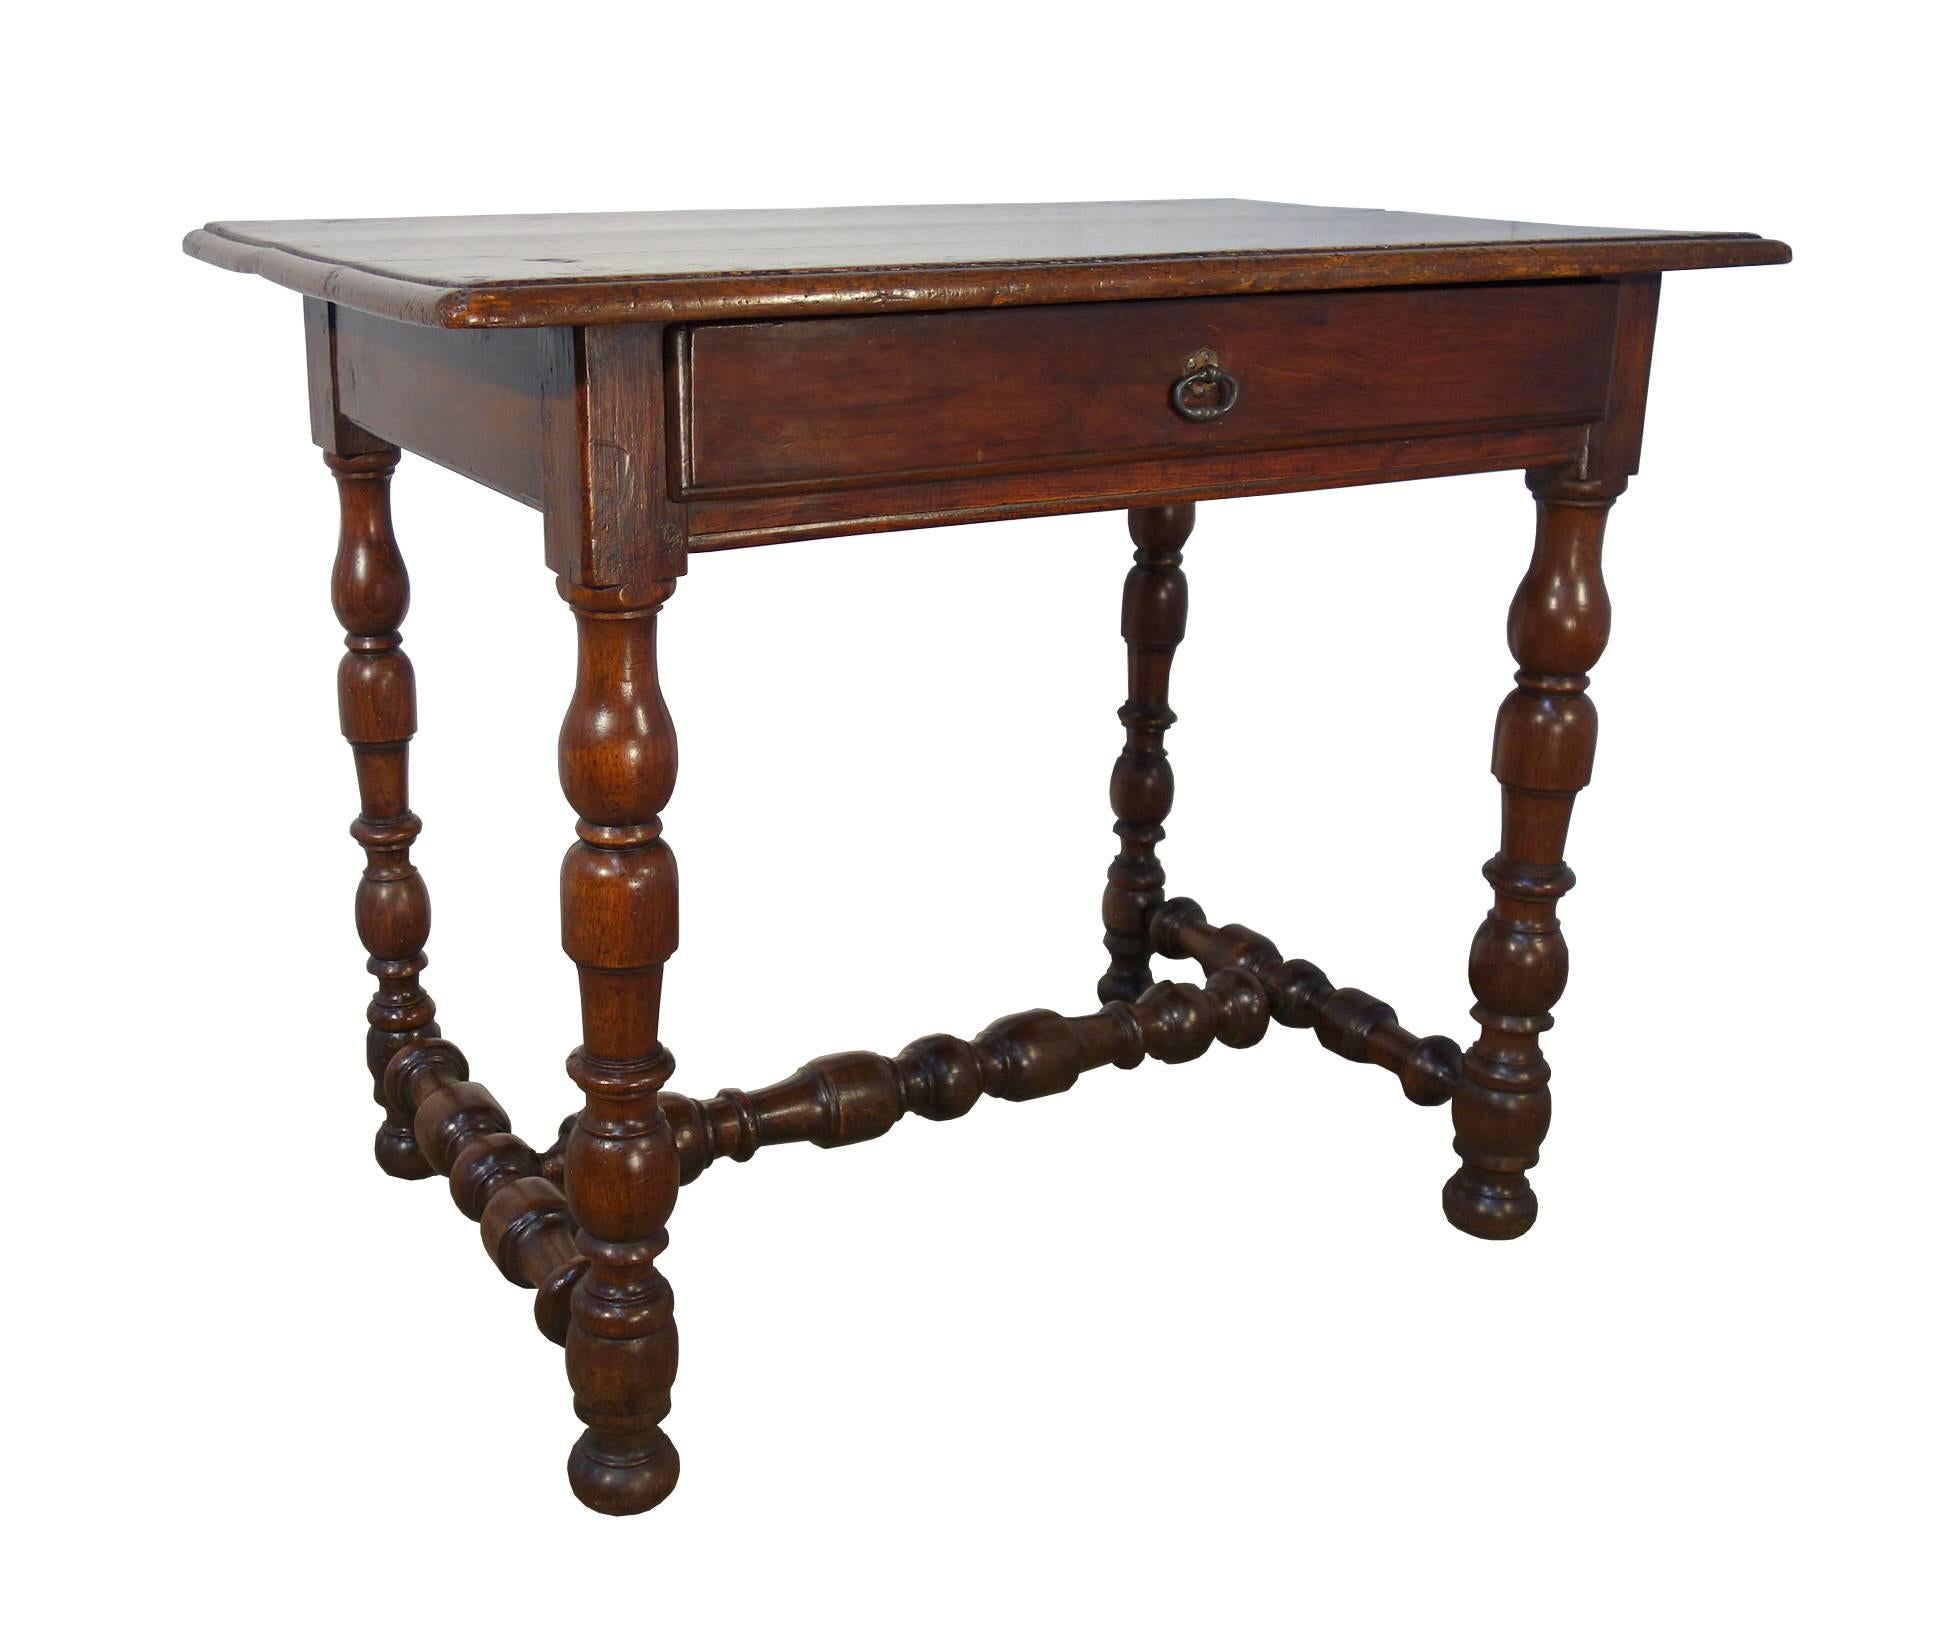 Antique Tuscan side table, solid walnut, fine turned legs and a stretcher & single center drawer. Renaissance Revival, early 19th century.

Measures:
37.5